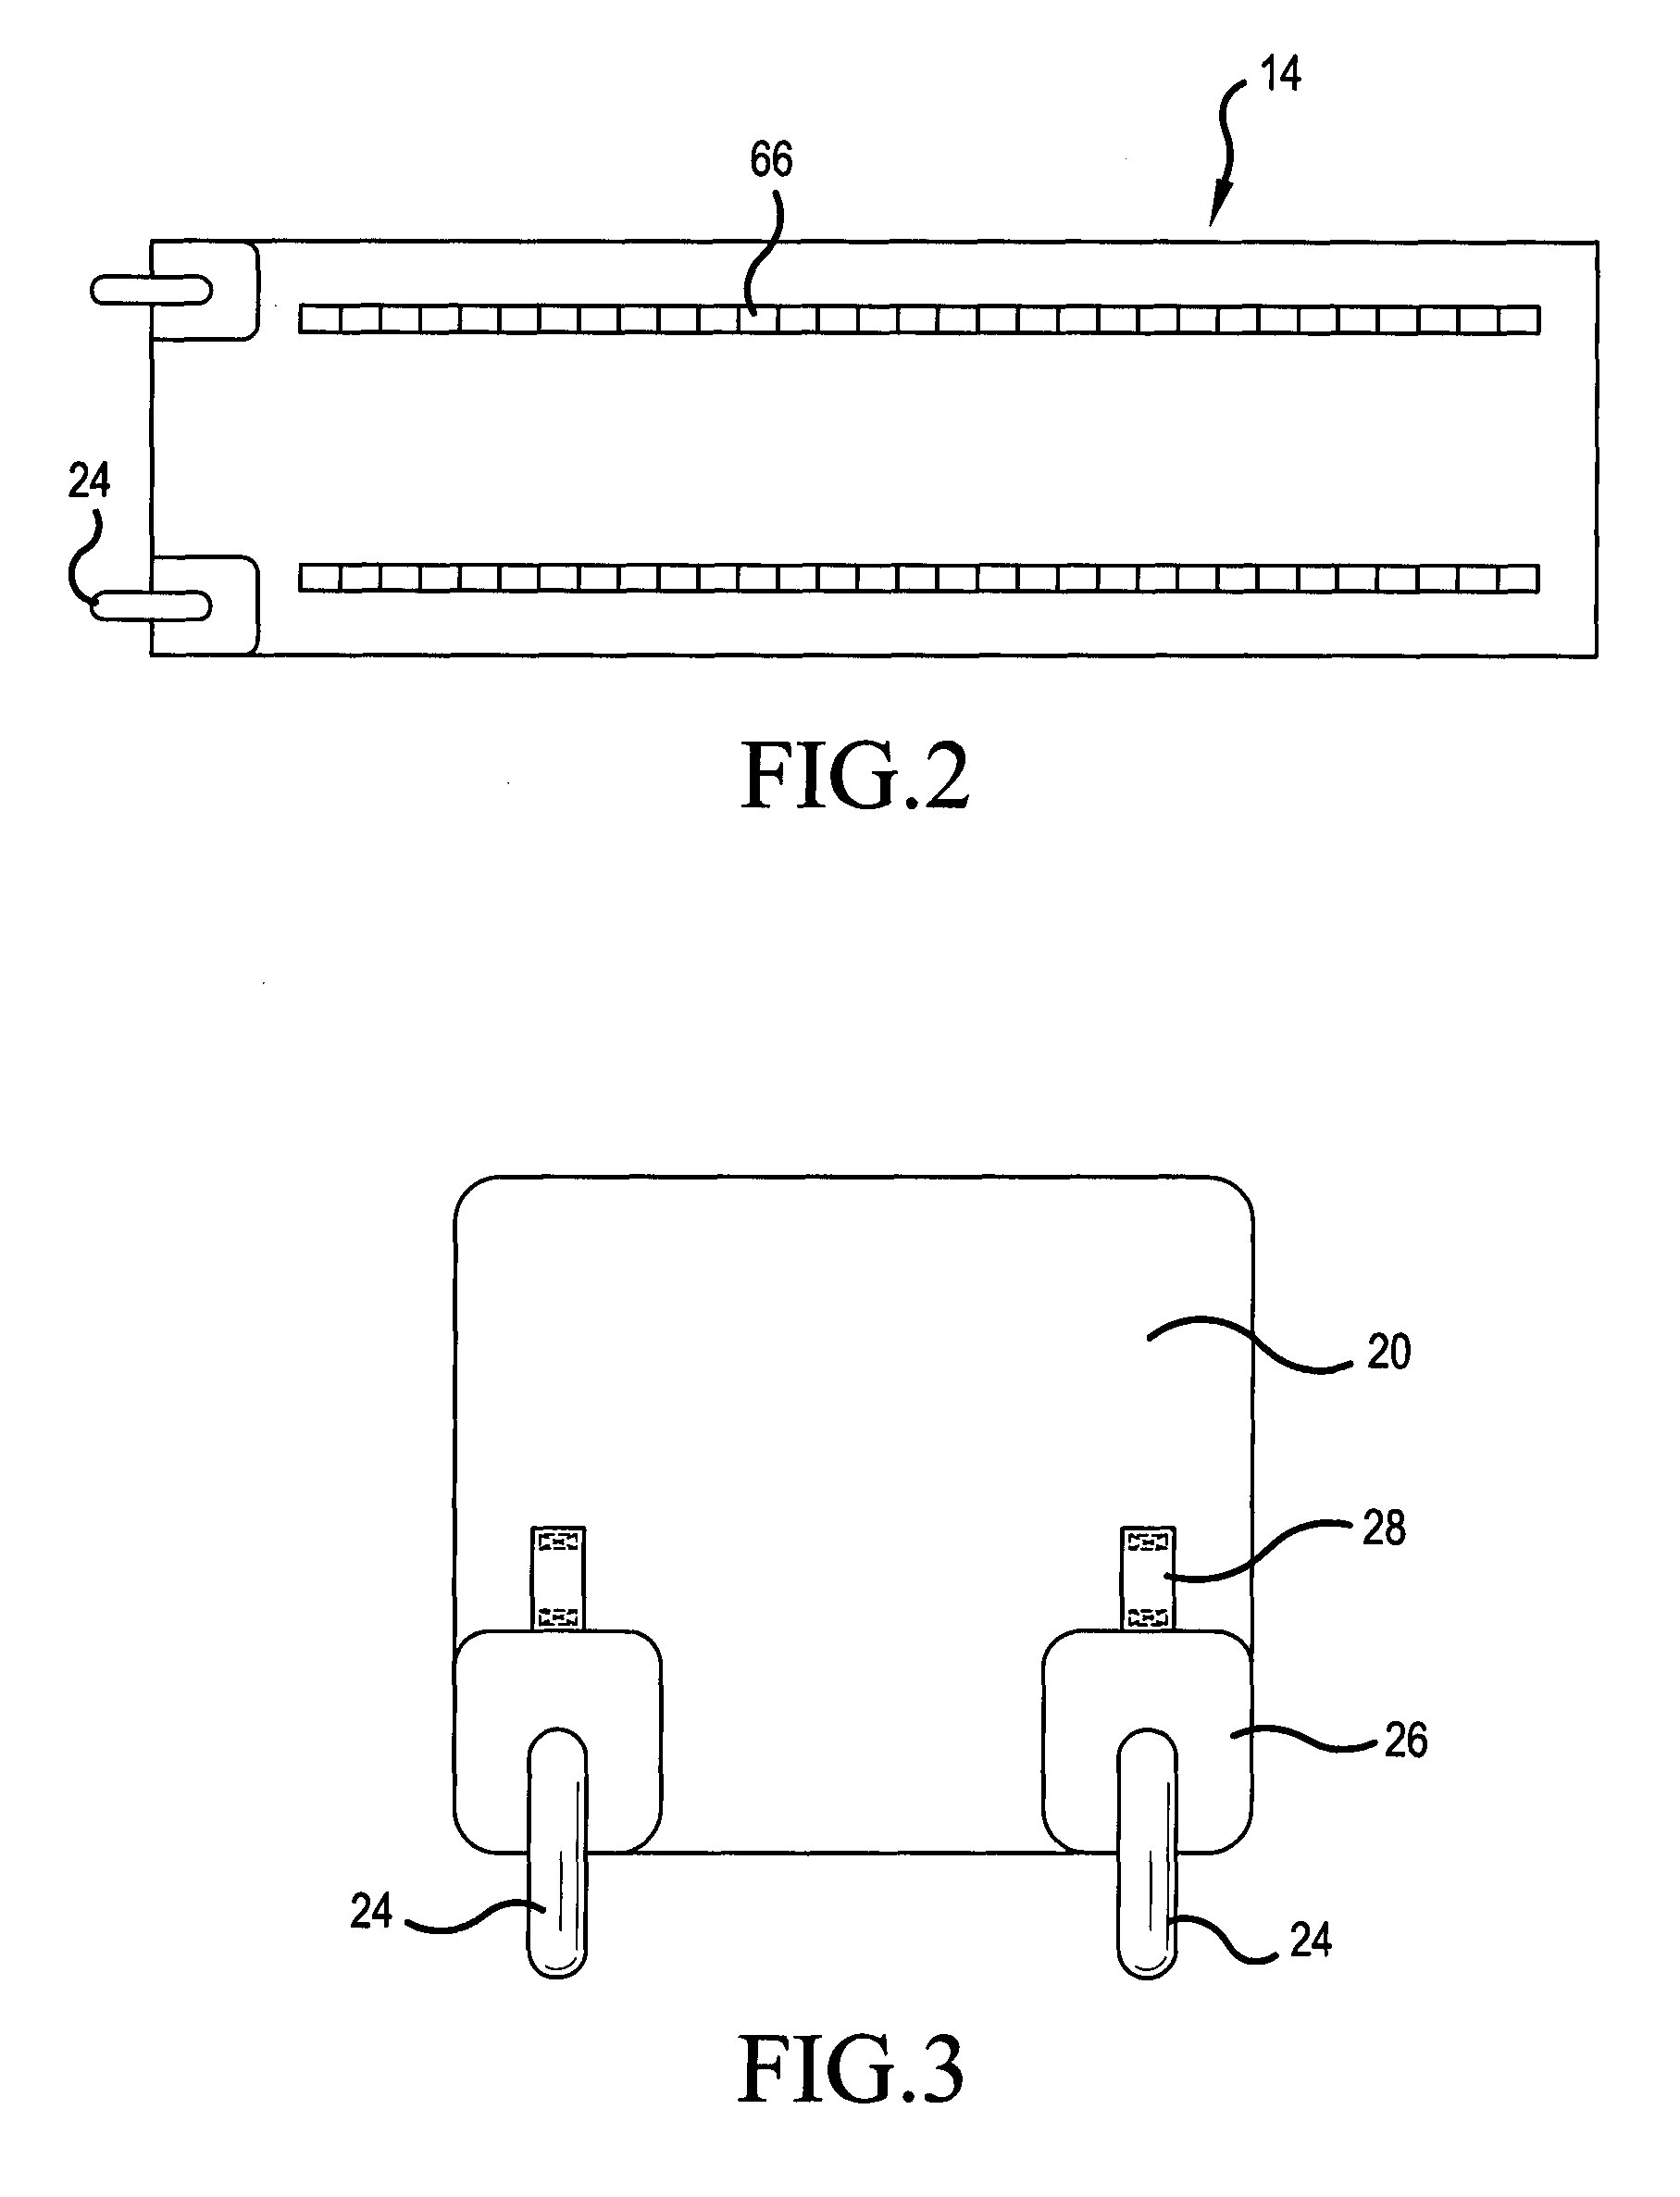 Accessory bag having reinforced sidewalls and variable length